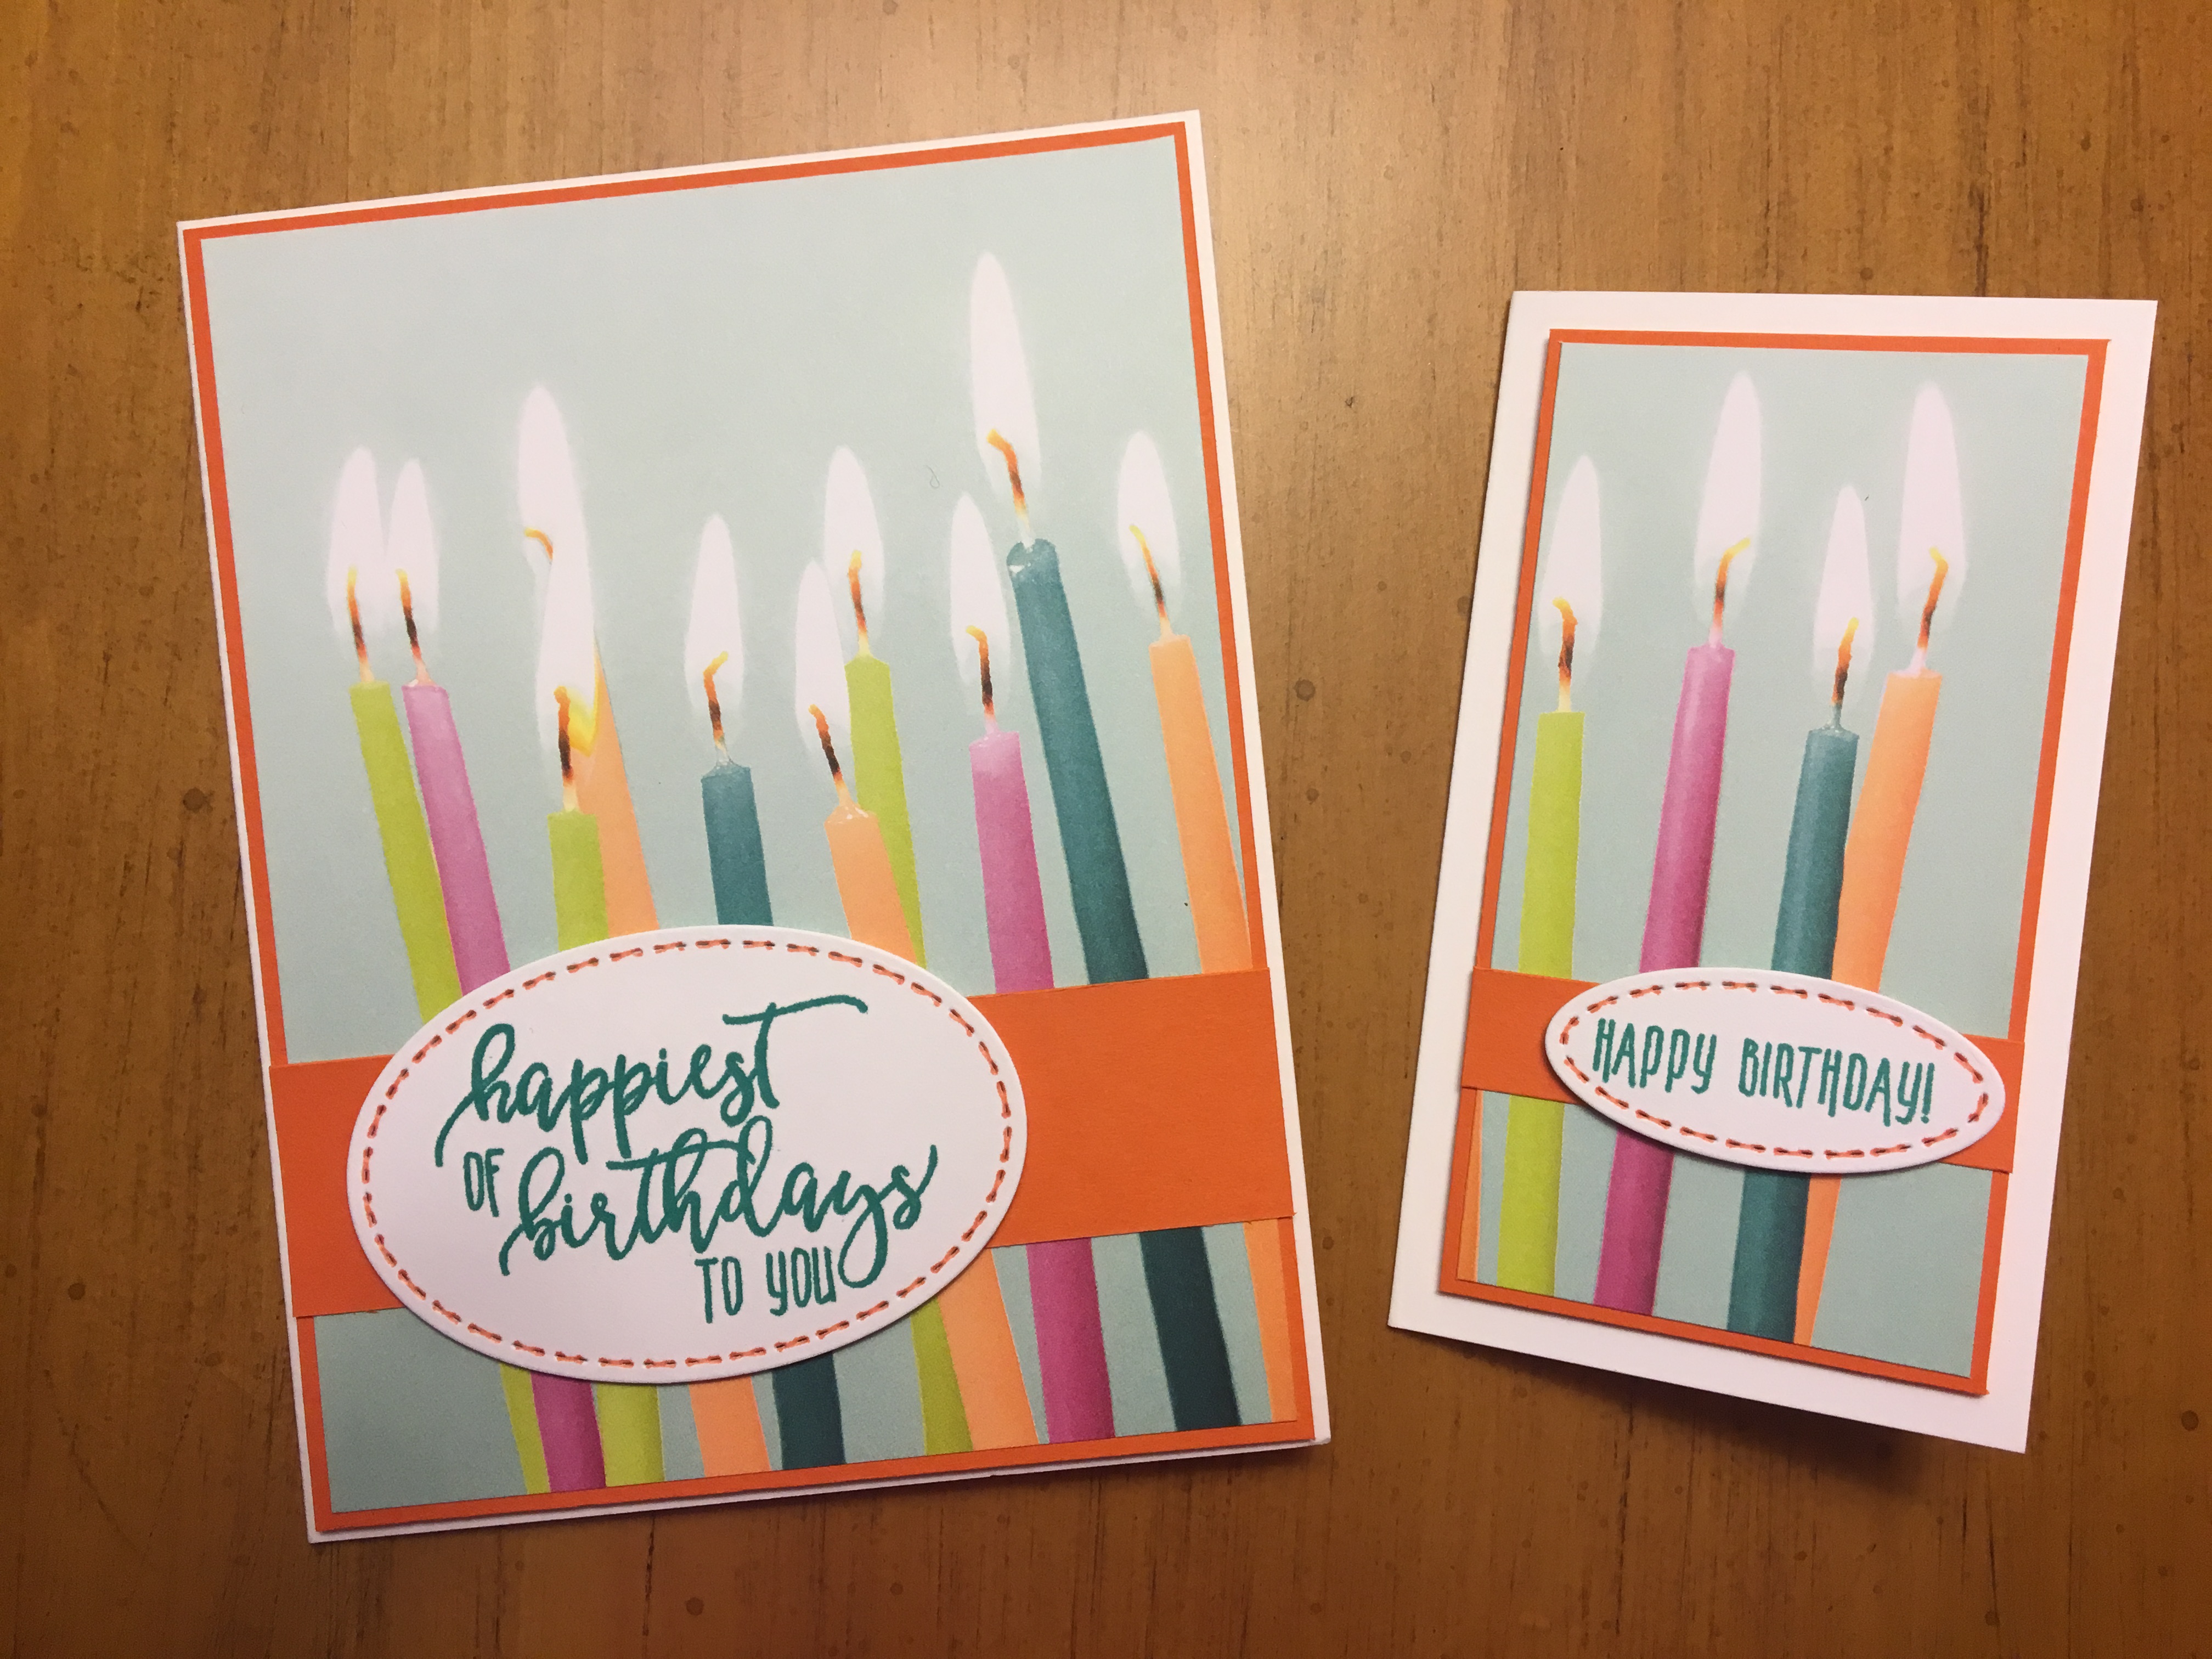 Picture Perfect Birthday Cards – Stamped Greetings